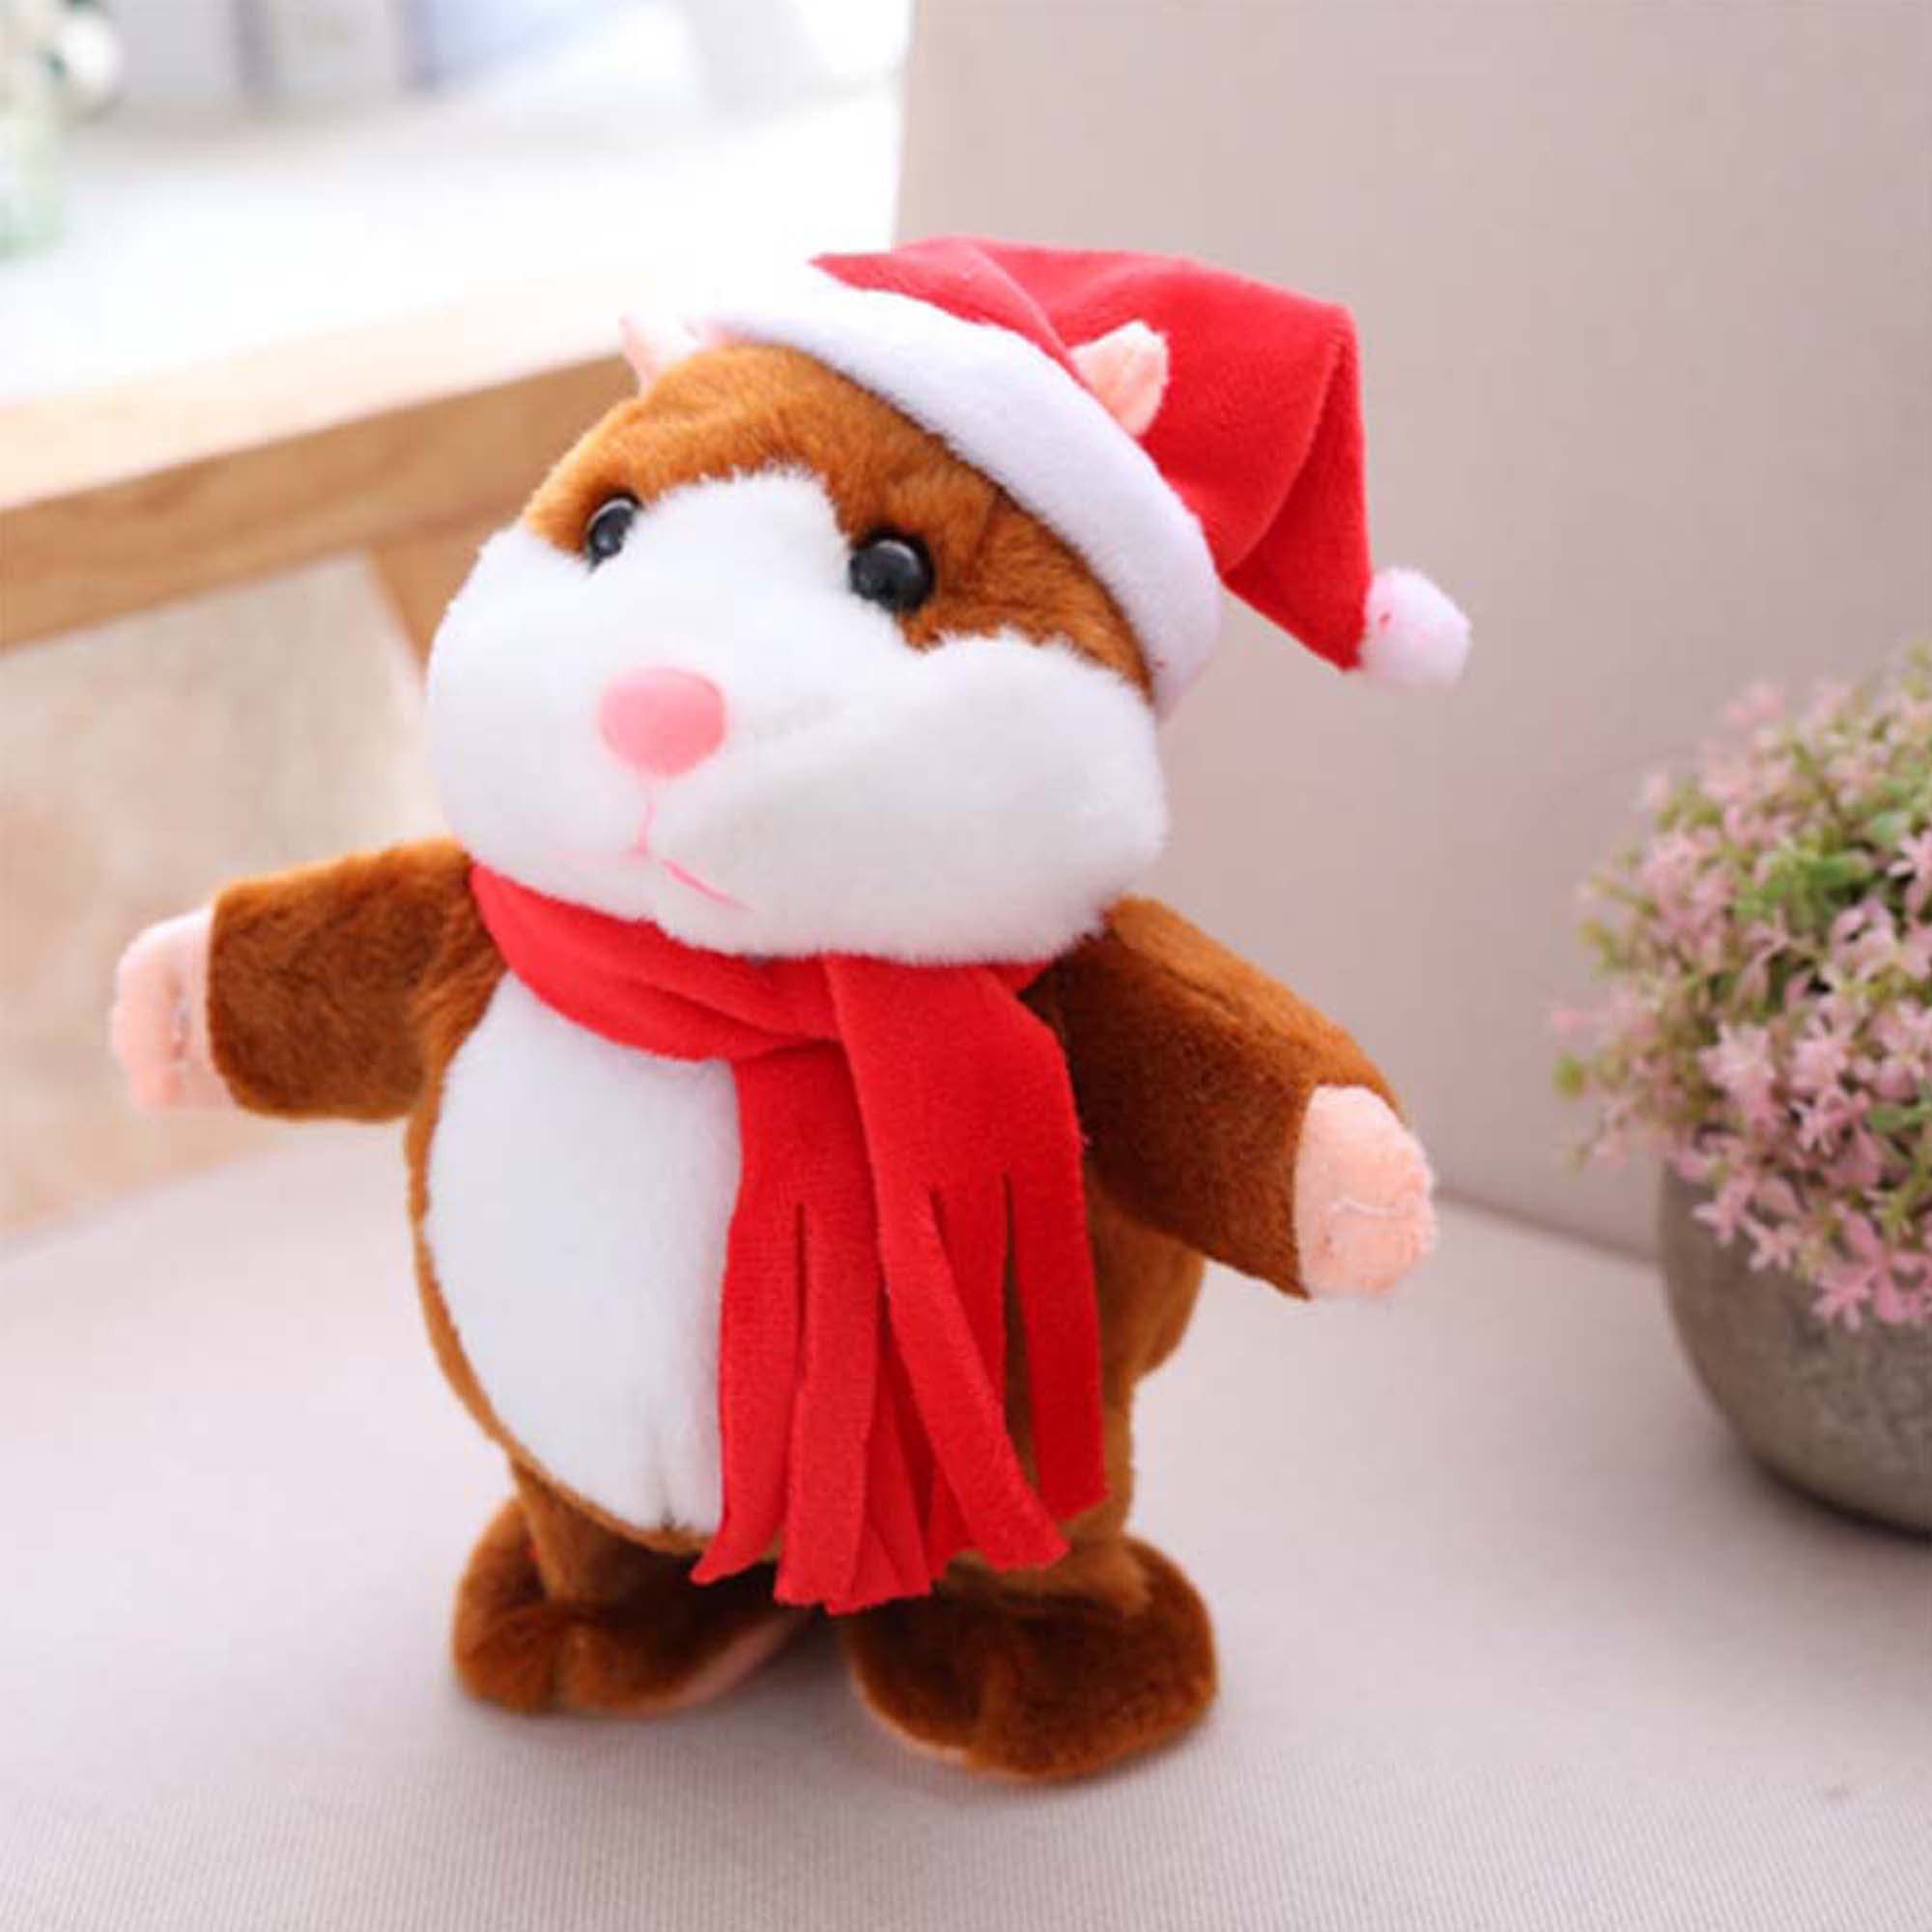 Cheeky Hamster talking mouse pet christmas toy speak sound record hamster Gift 